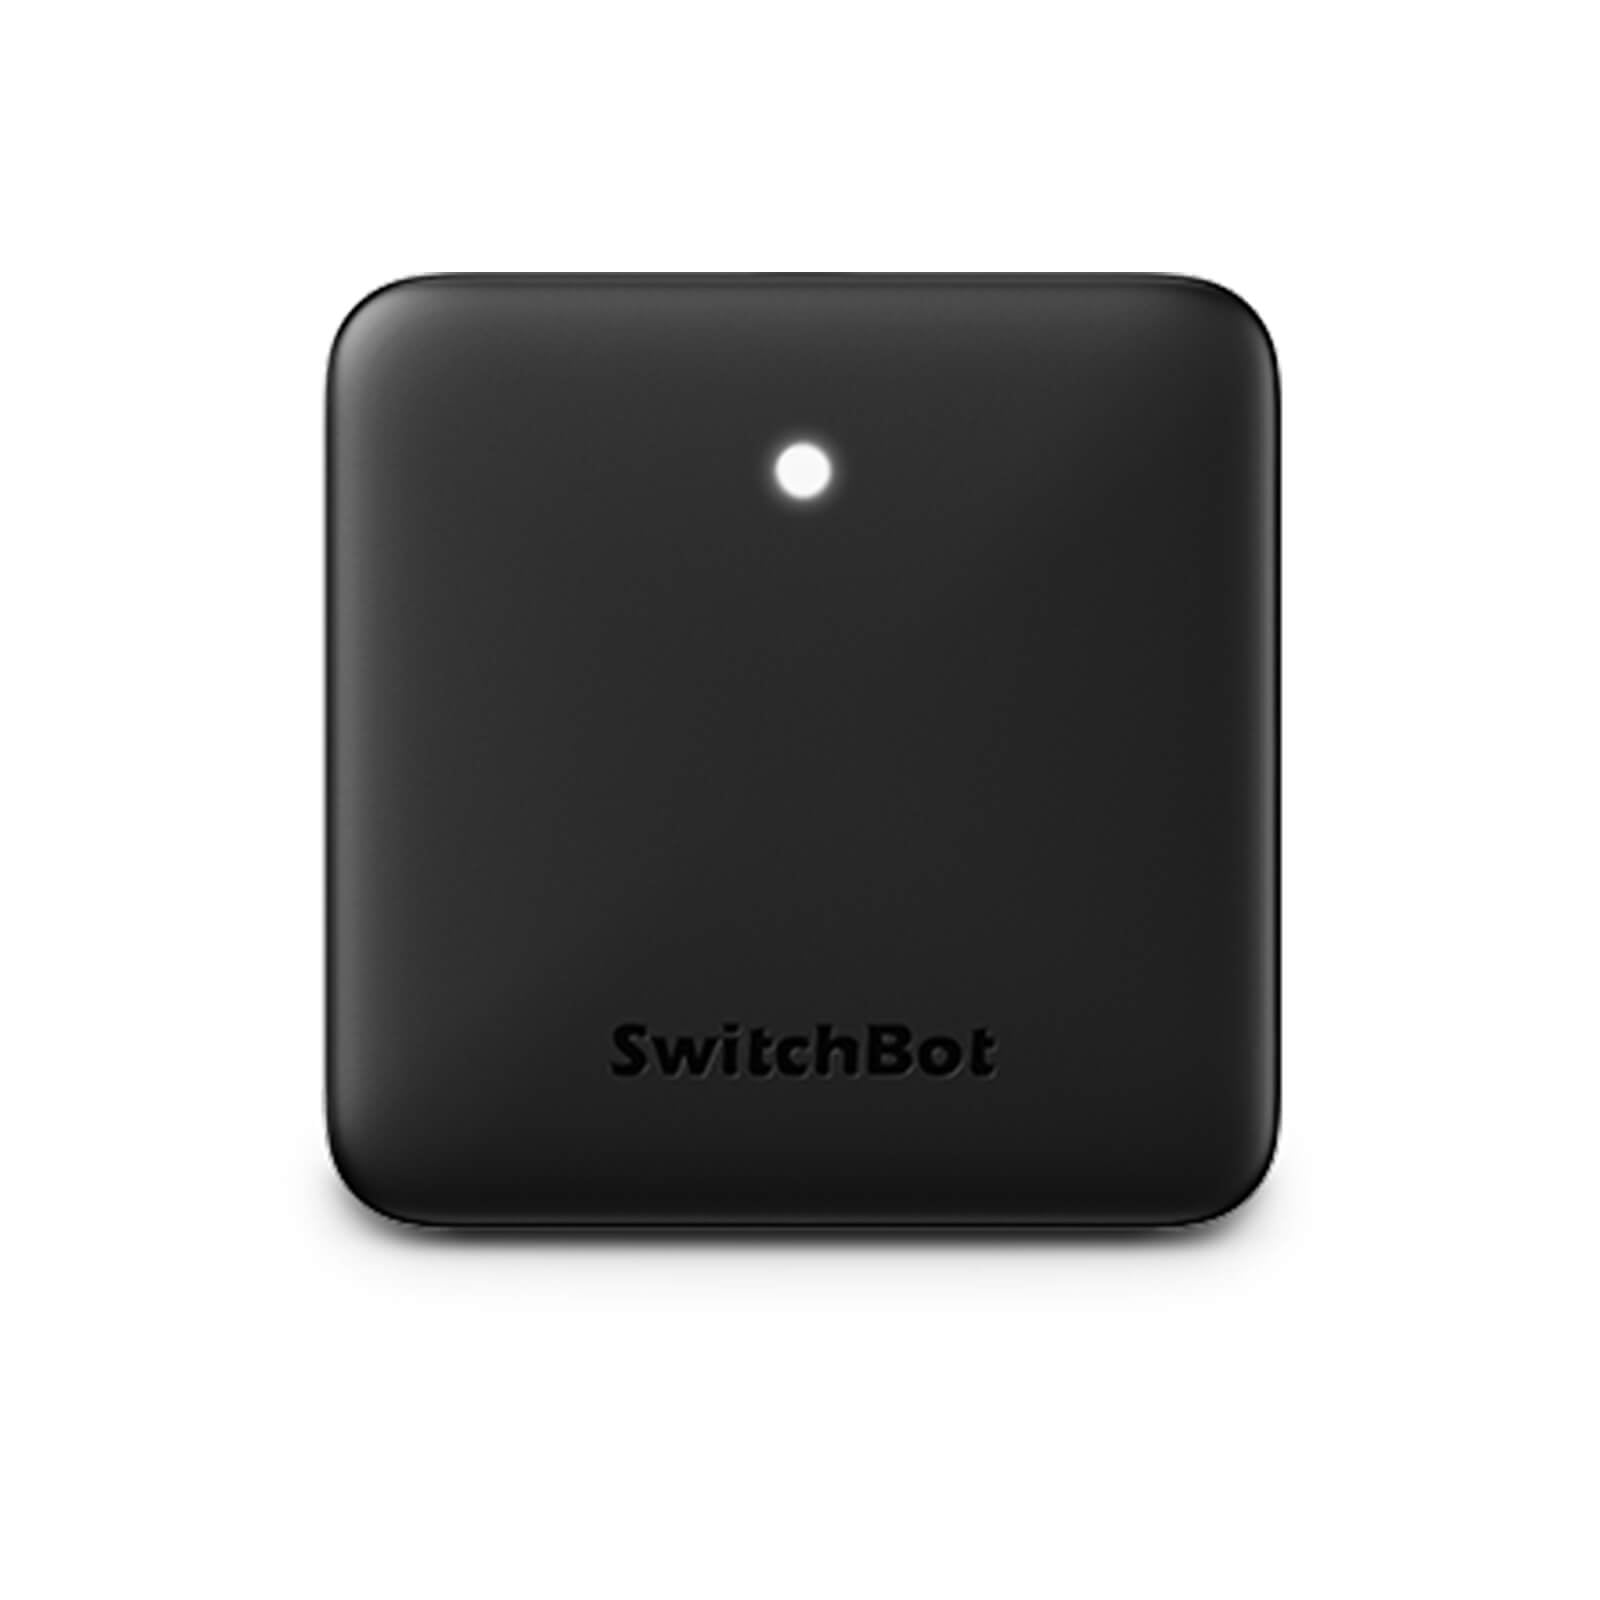 SwitchBot Review: A Cheap Gadget to Make Your Home Smart